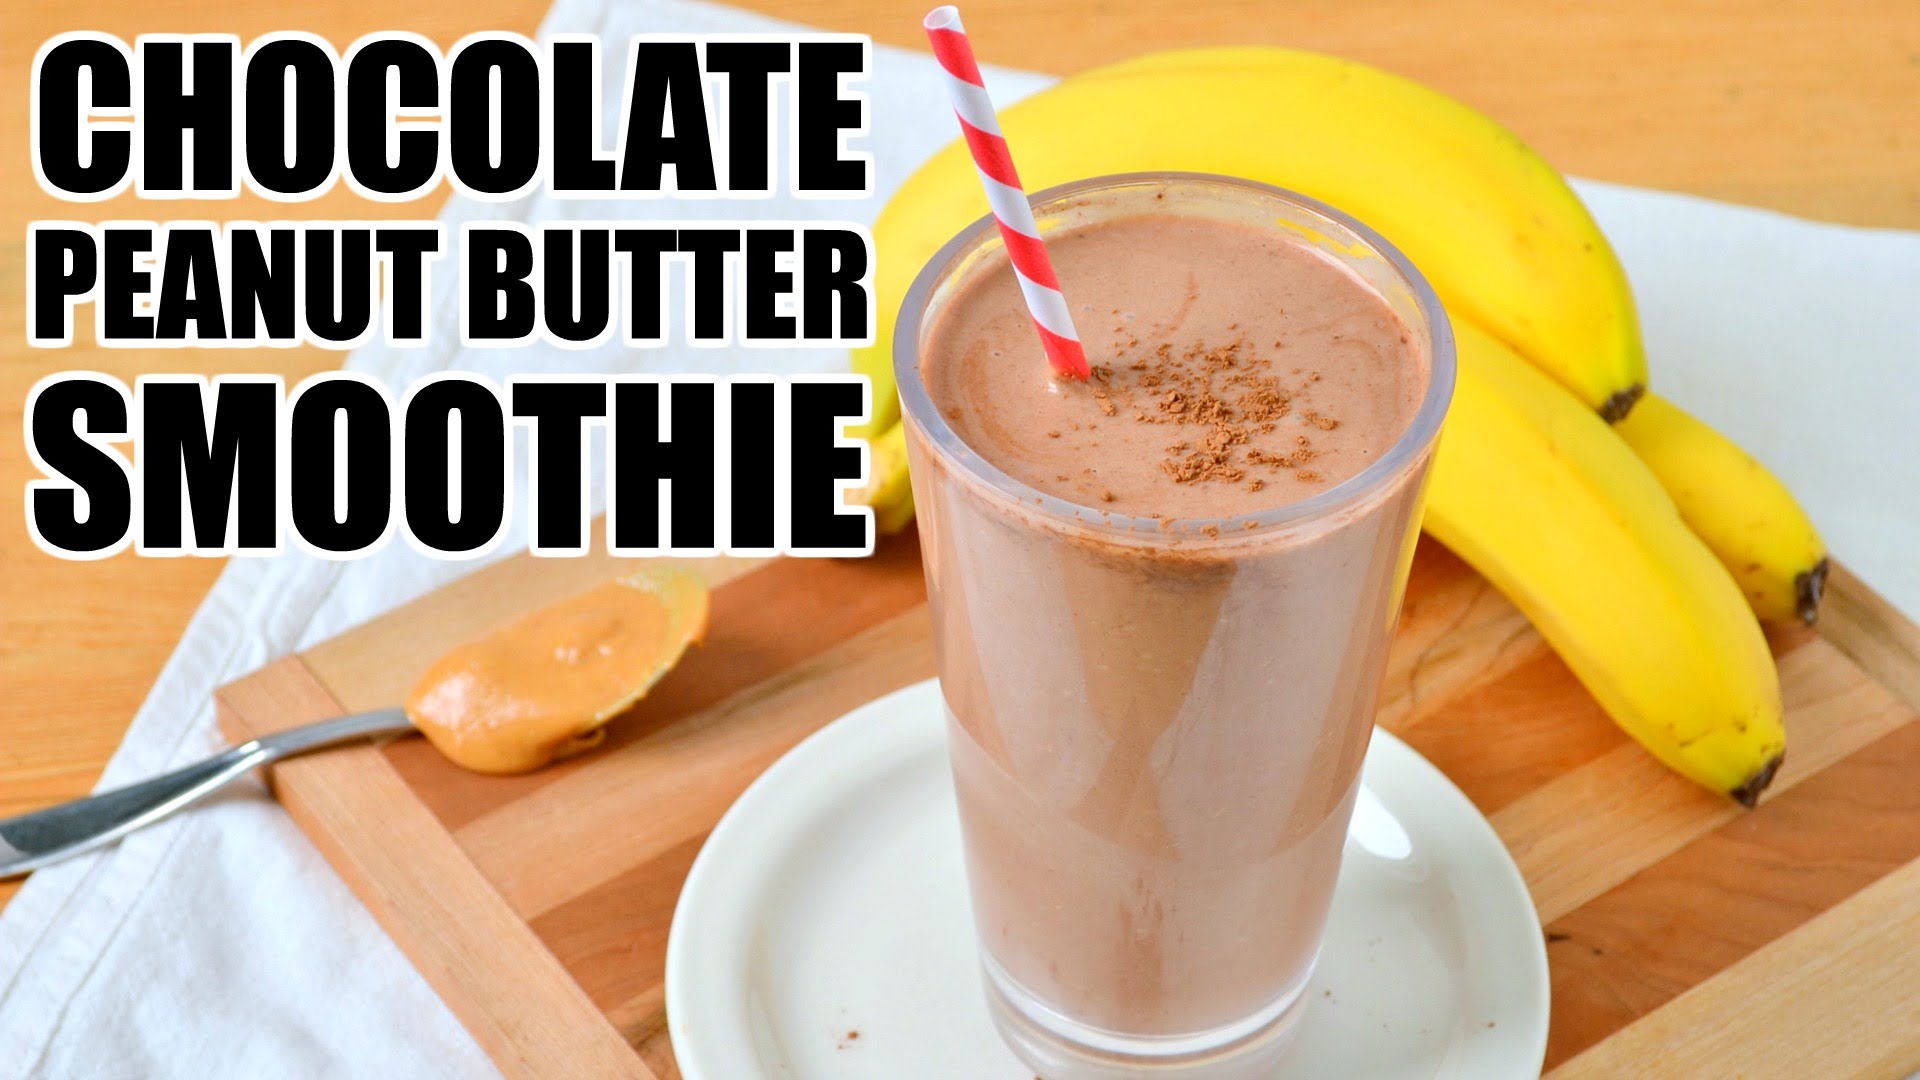 14 Fast & Easy Chocolate Smoothie Recipes